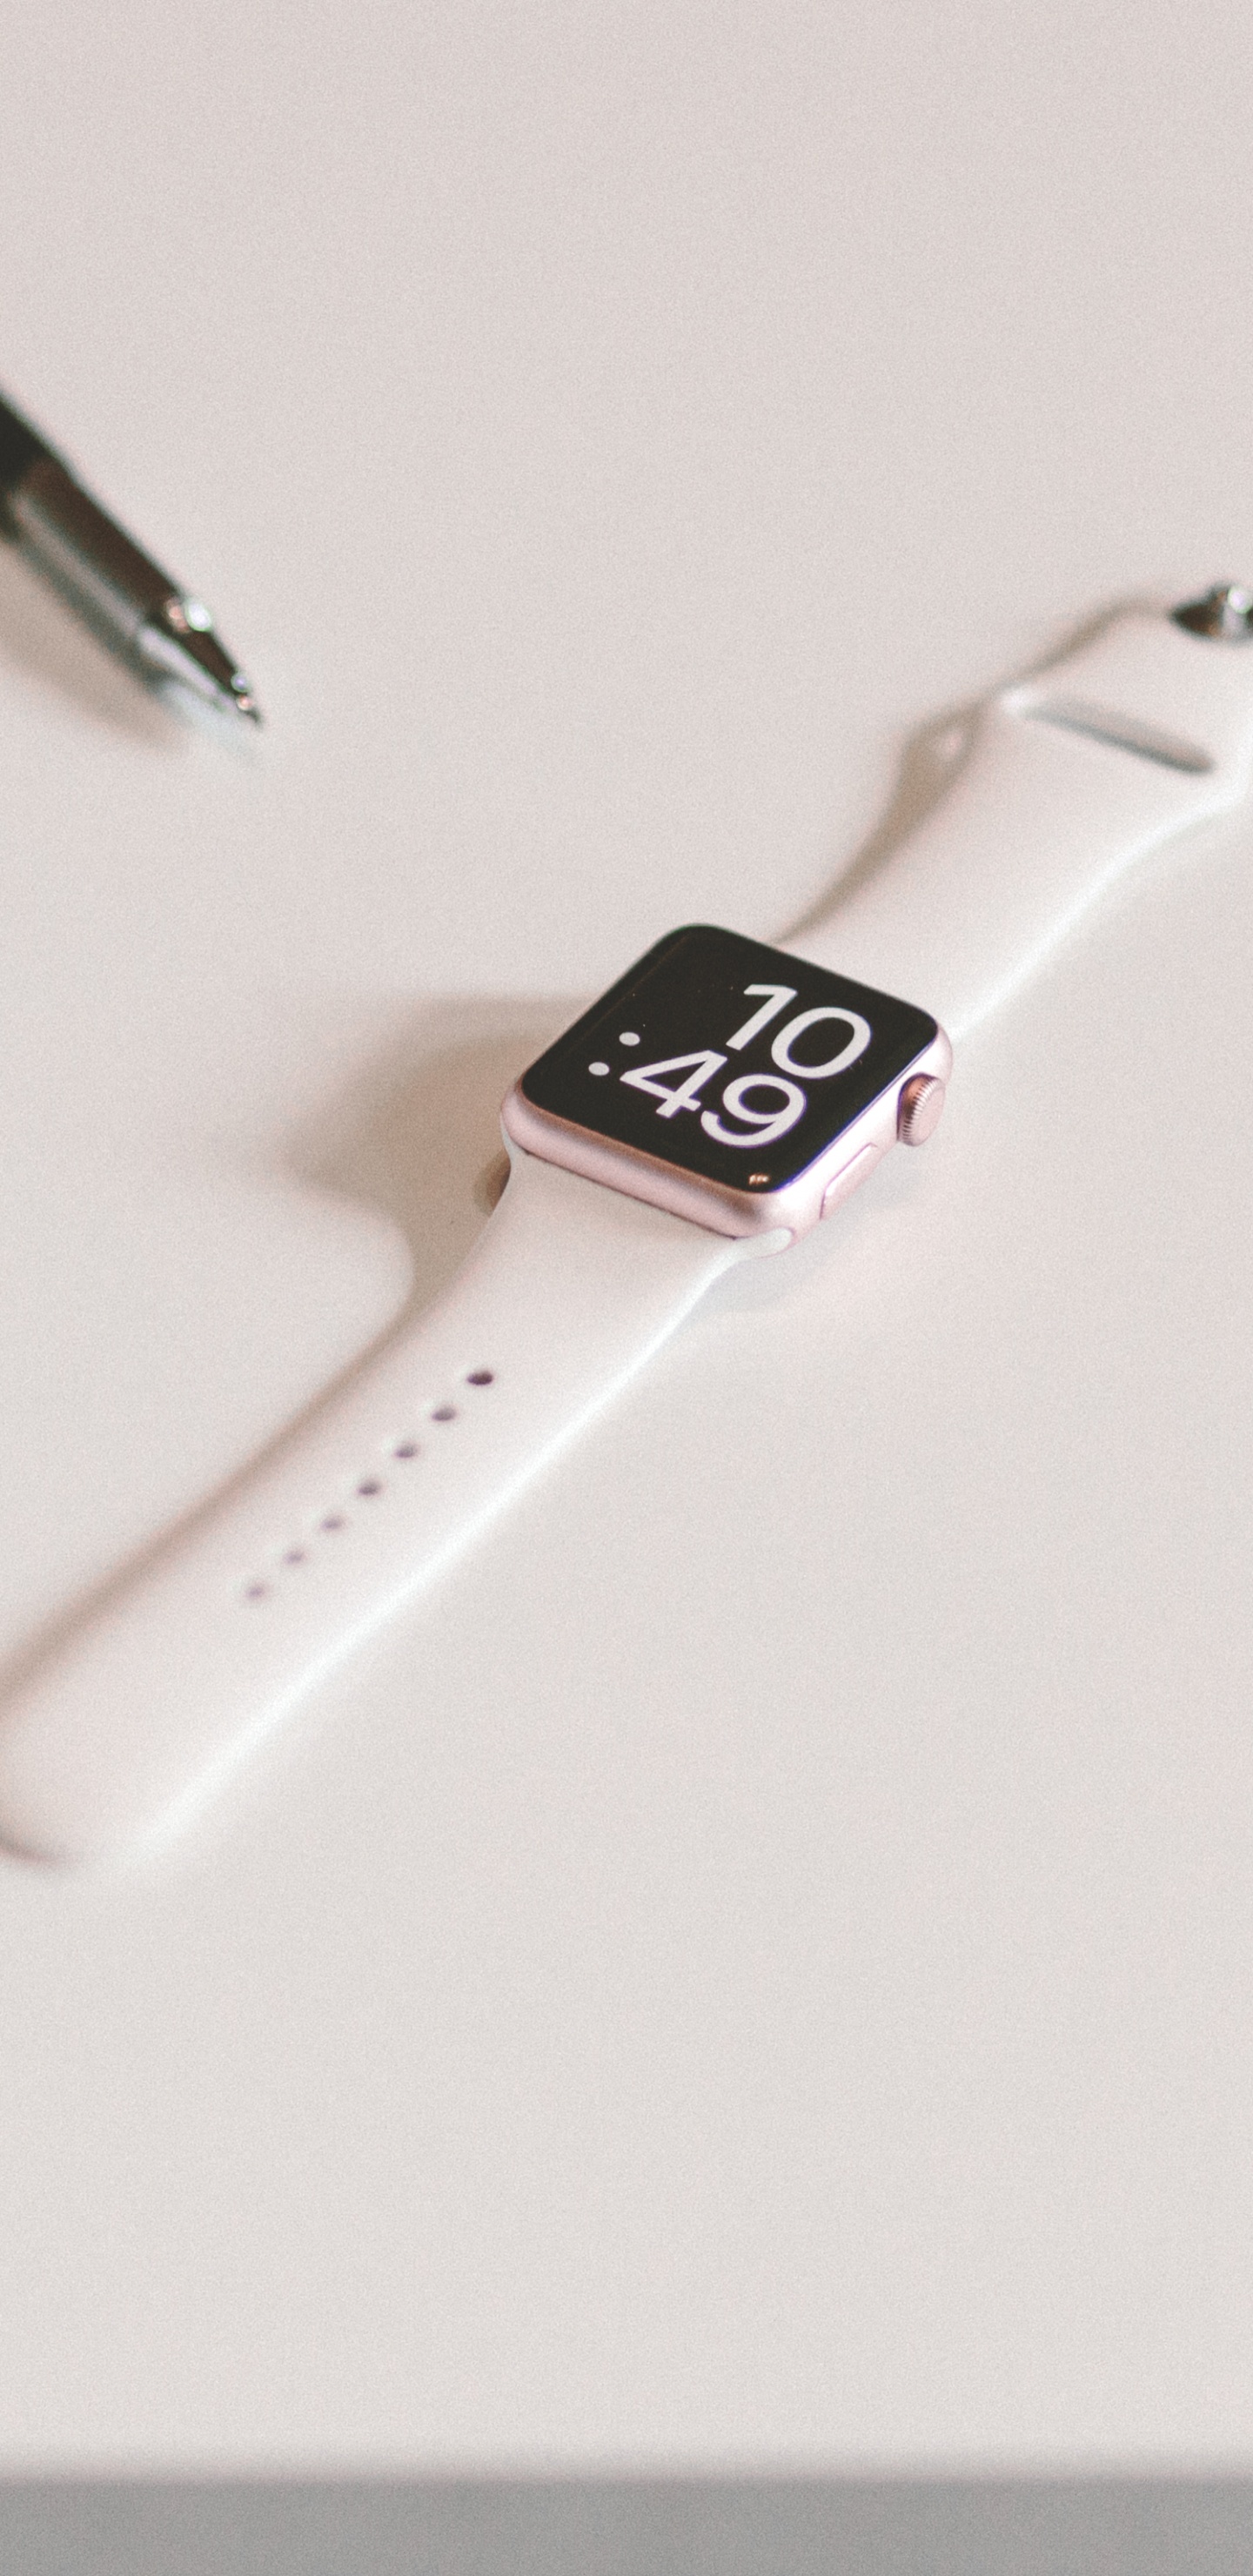 Silver Apple Watch With White Sport Band Beside Black Click Pen. Wallpaper in 1440x2960 Resolution